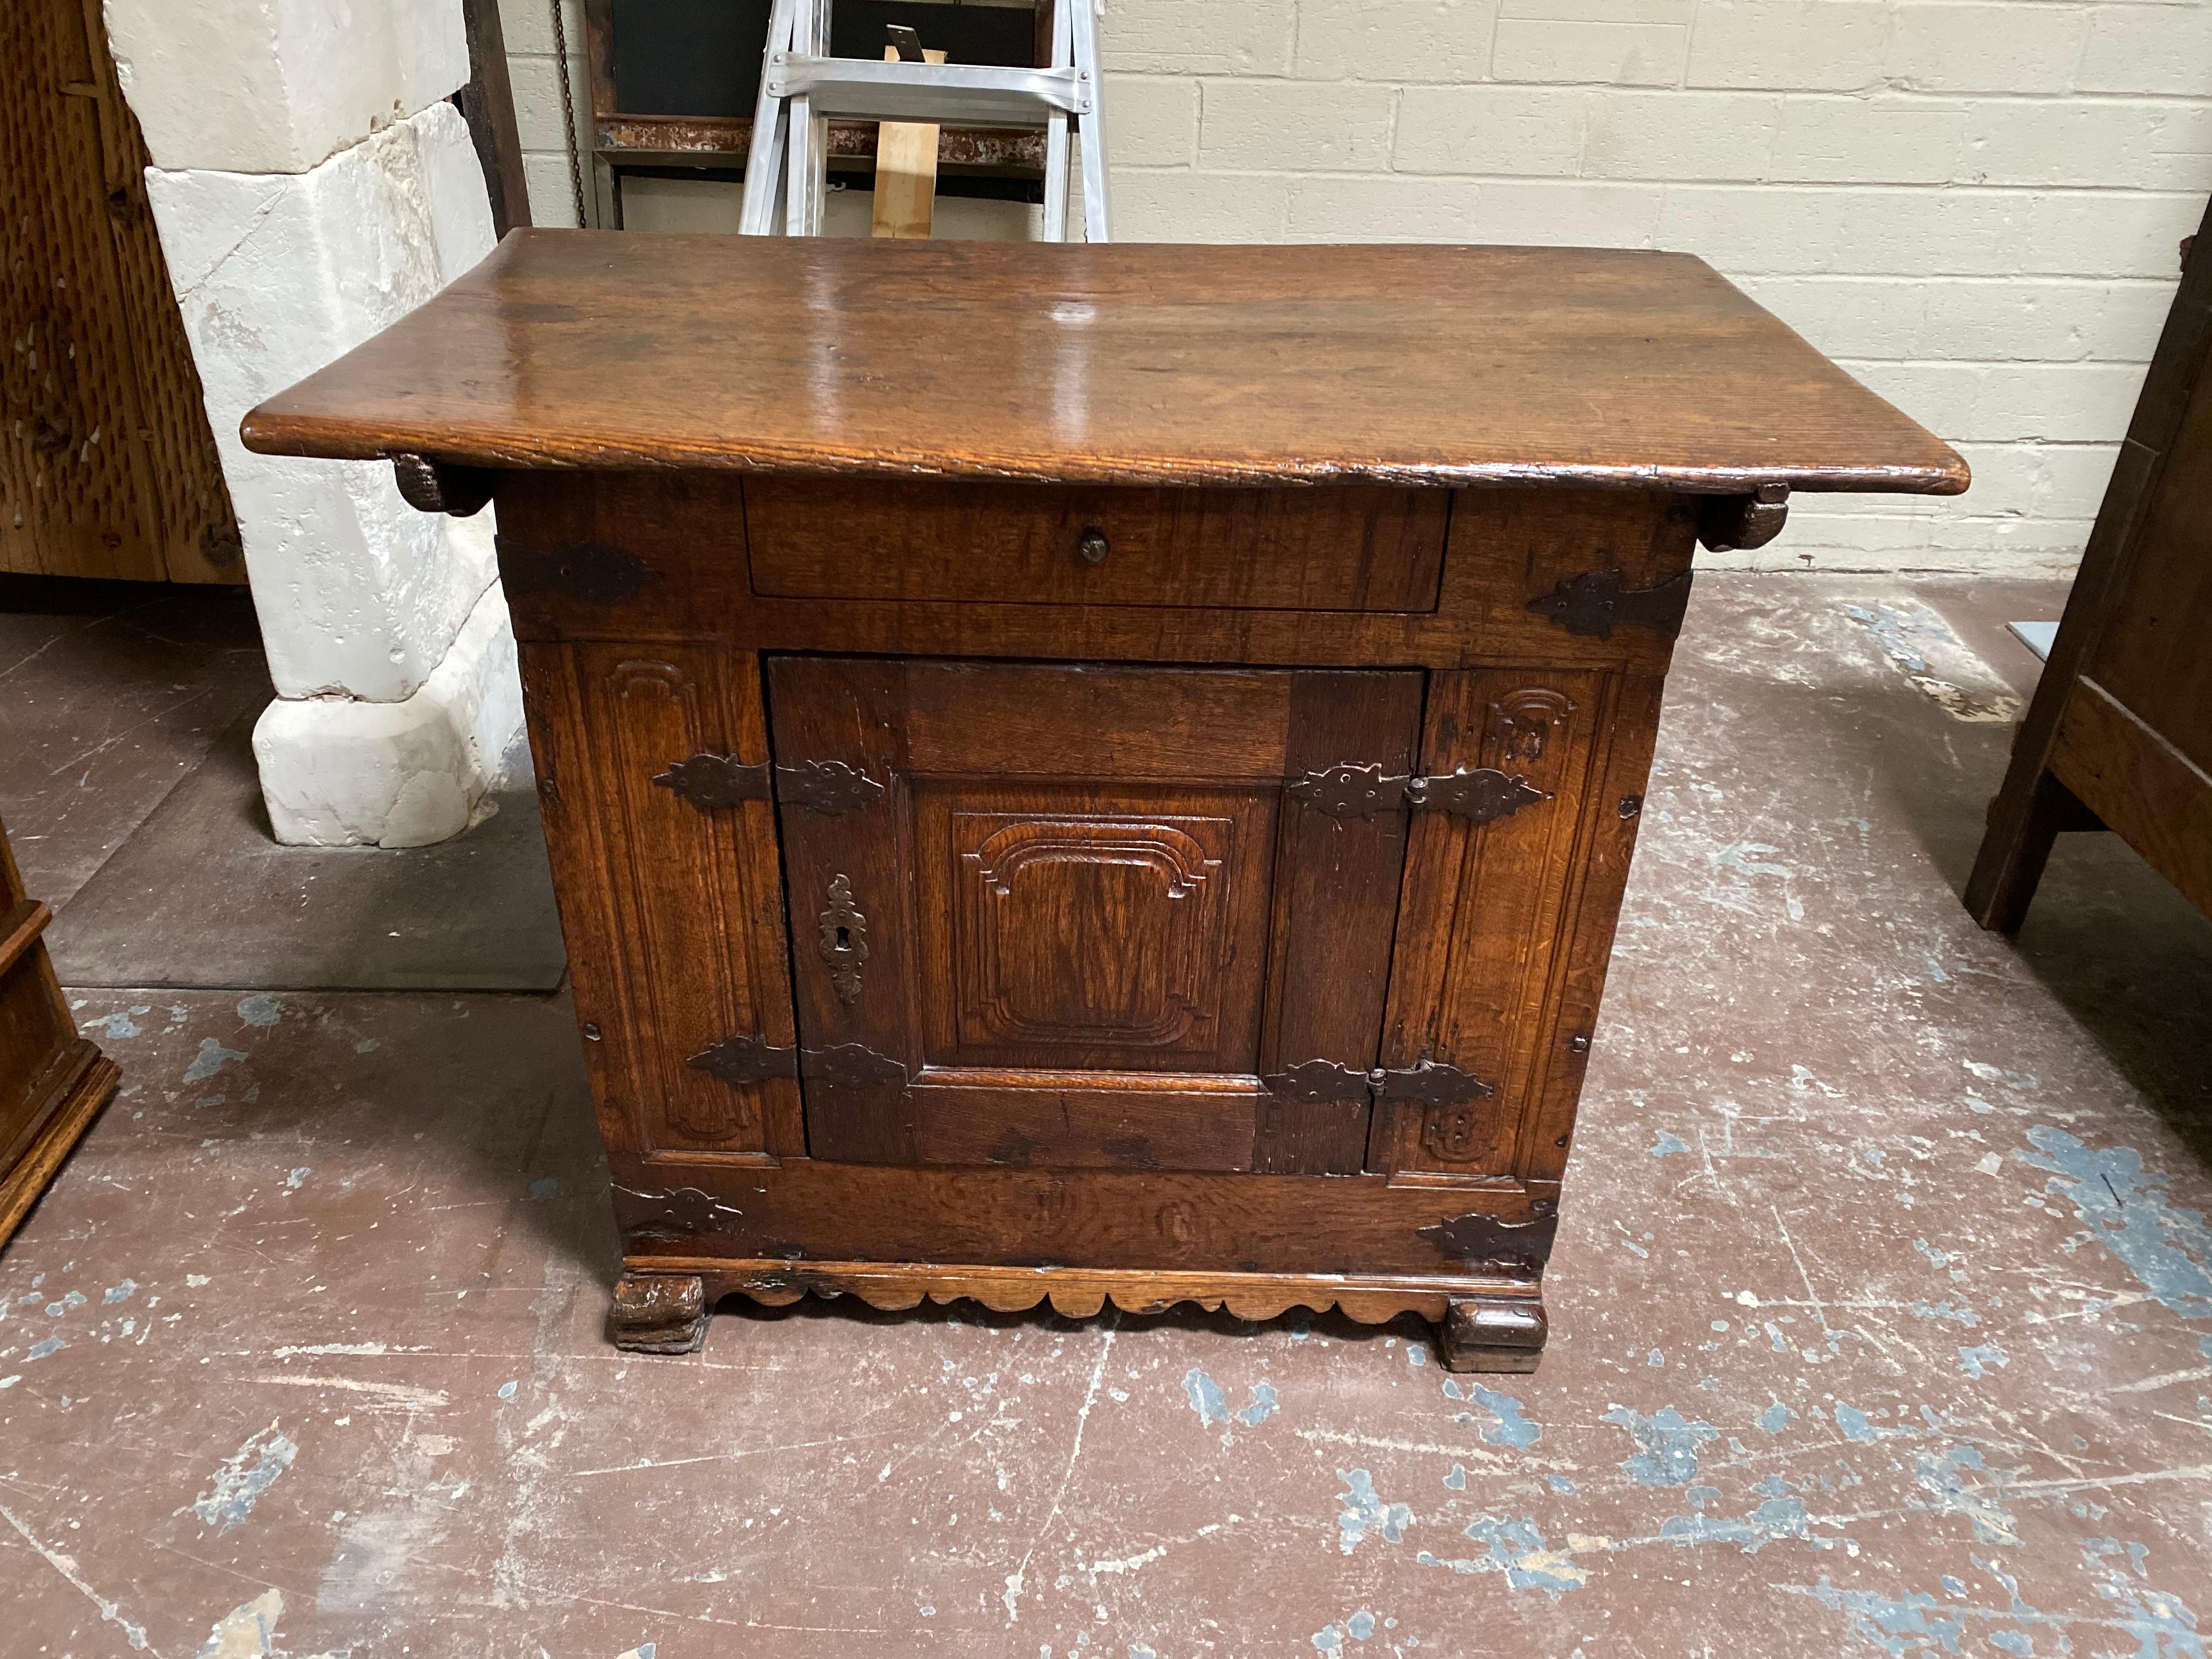 This antique Spanish console makes for a standout bedside table. 

Measurements: 23'' D x 43'' W x 33'' H.